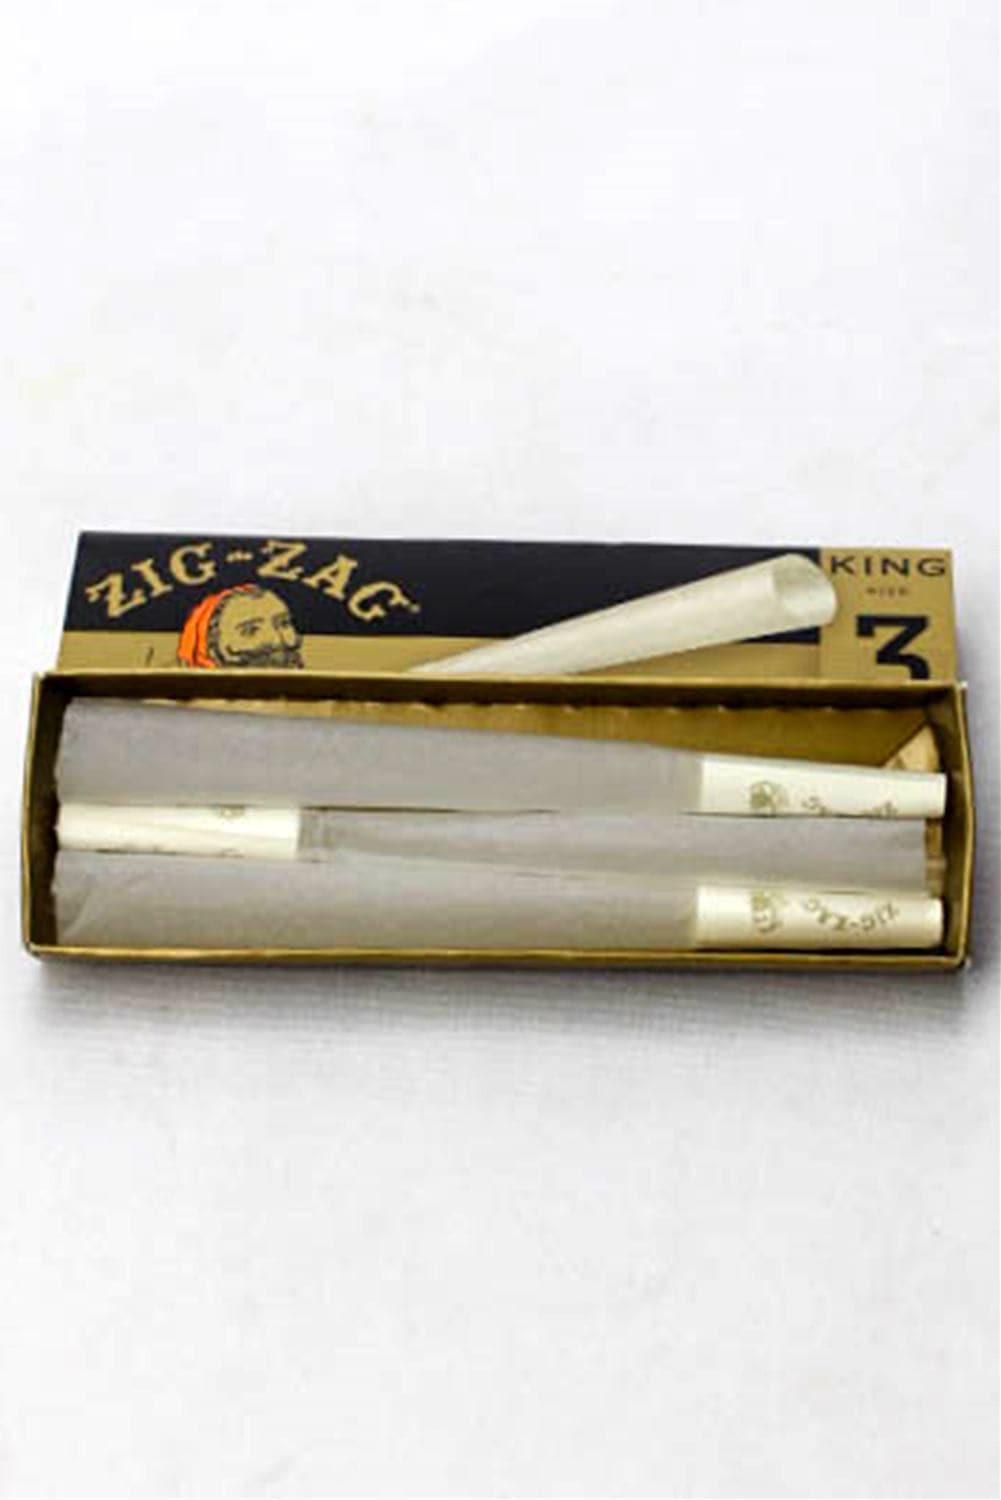 ZIG-ZAG Pre-Rolled Cone display